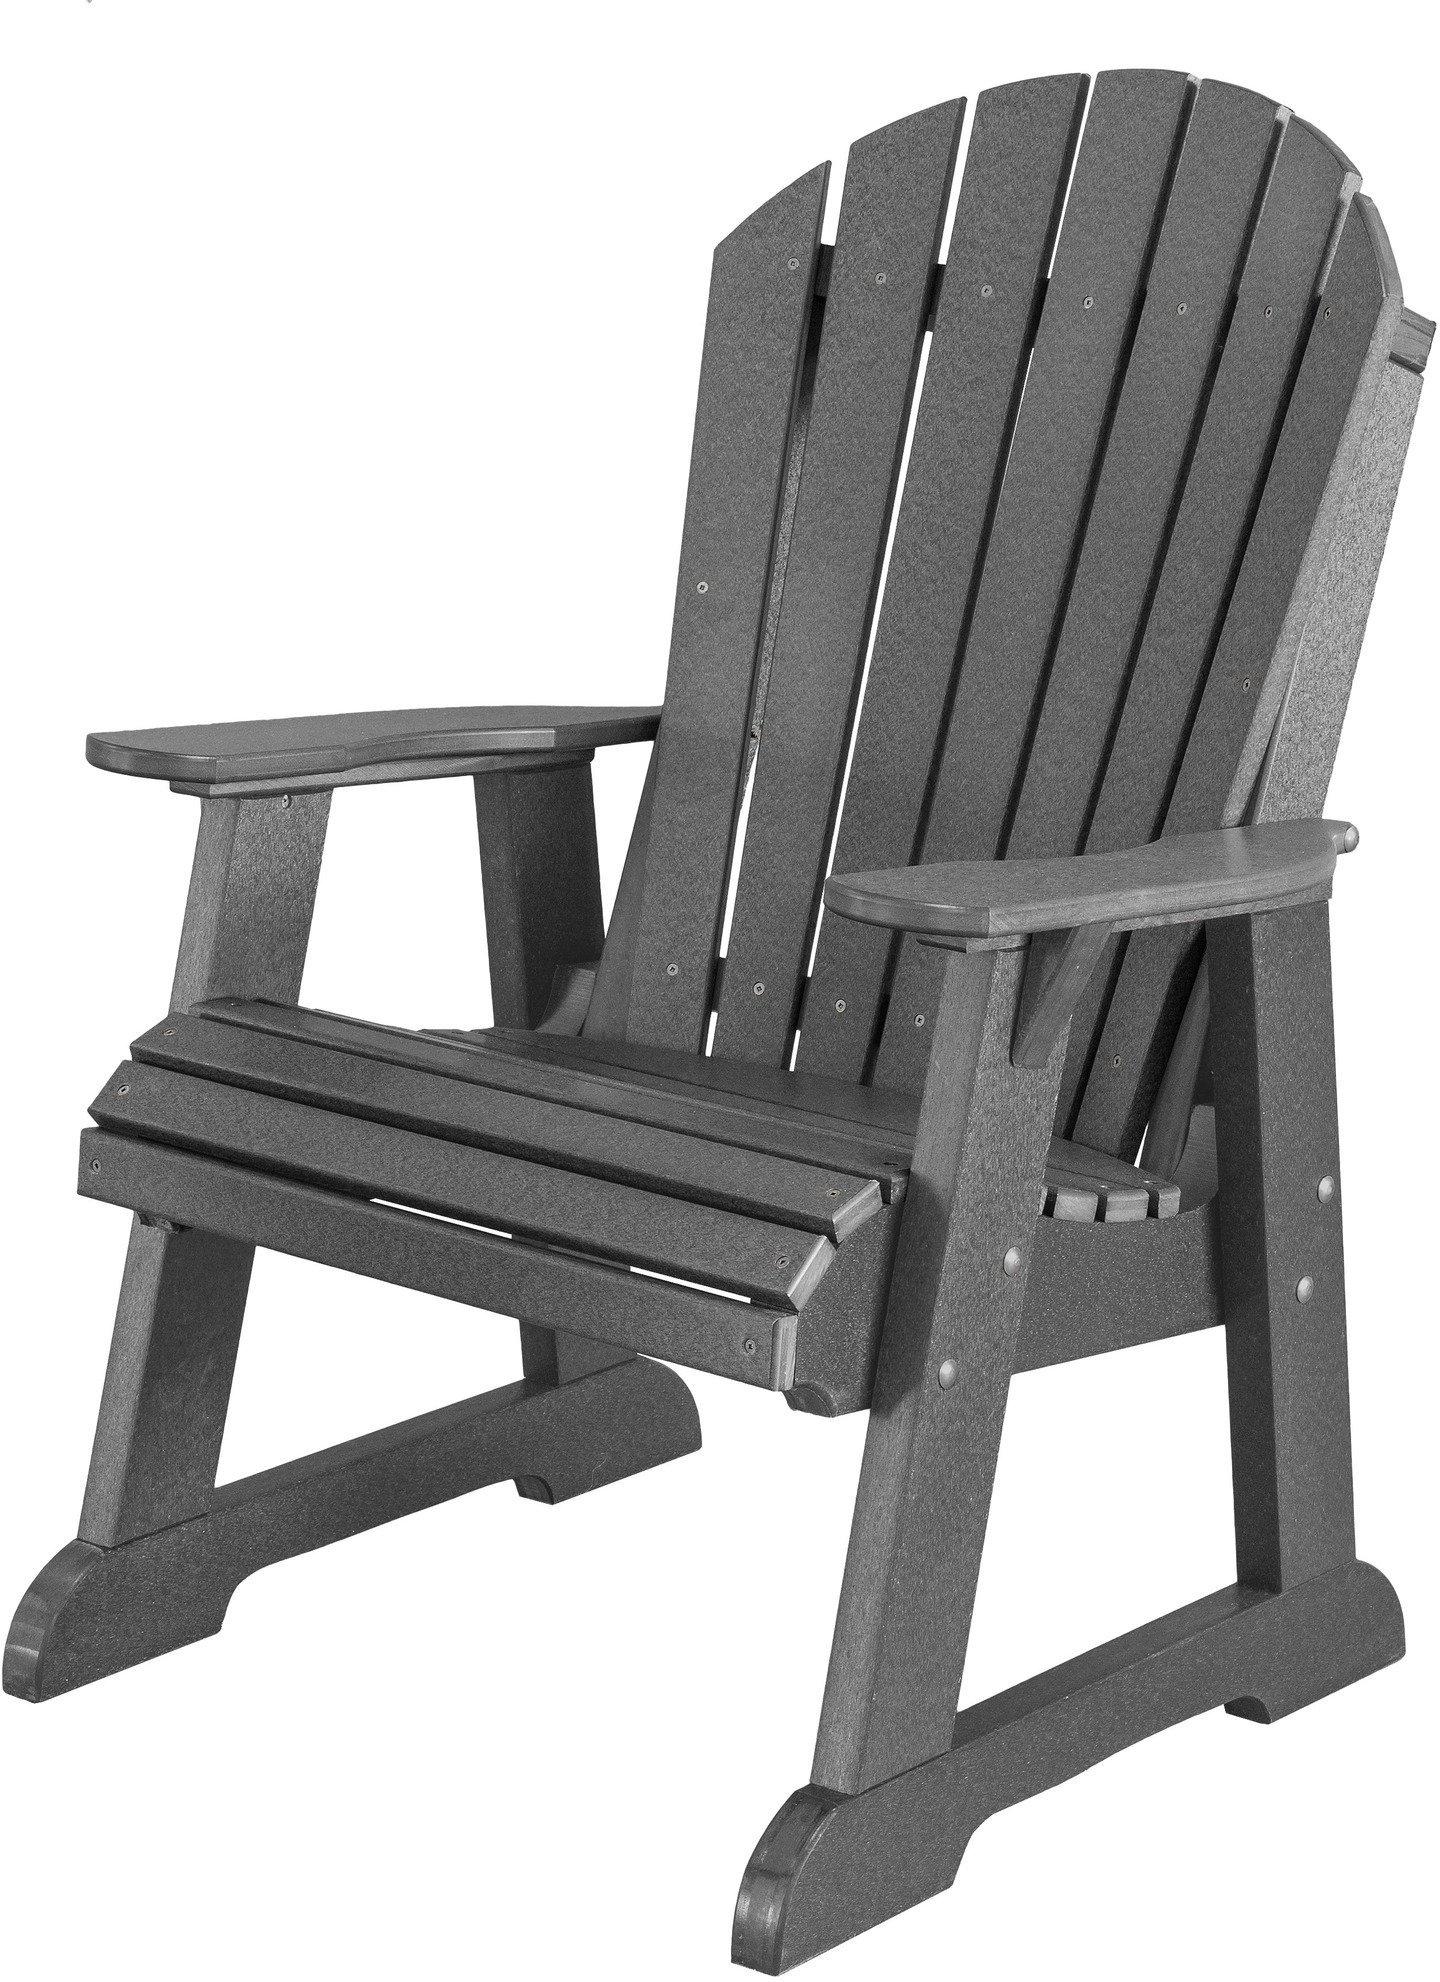 Wildridge Recycled Plastic Heritage Outdoor High Fan Back Chair - LEAD TIME TO SHIP 3 WEEKS